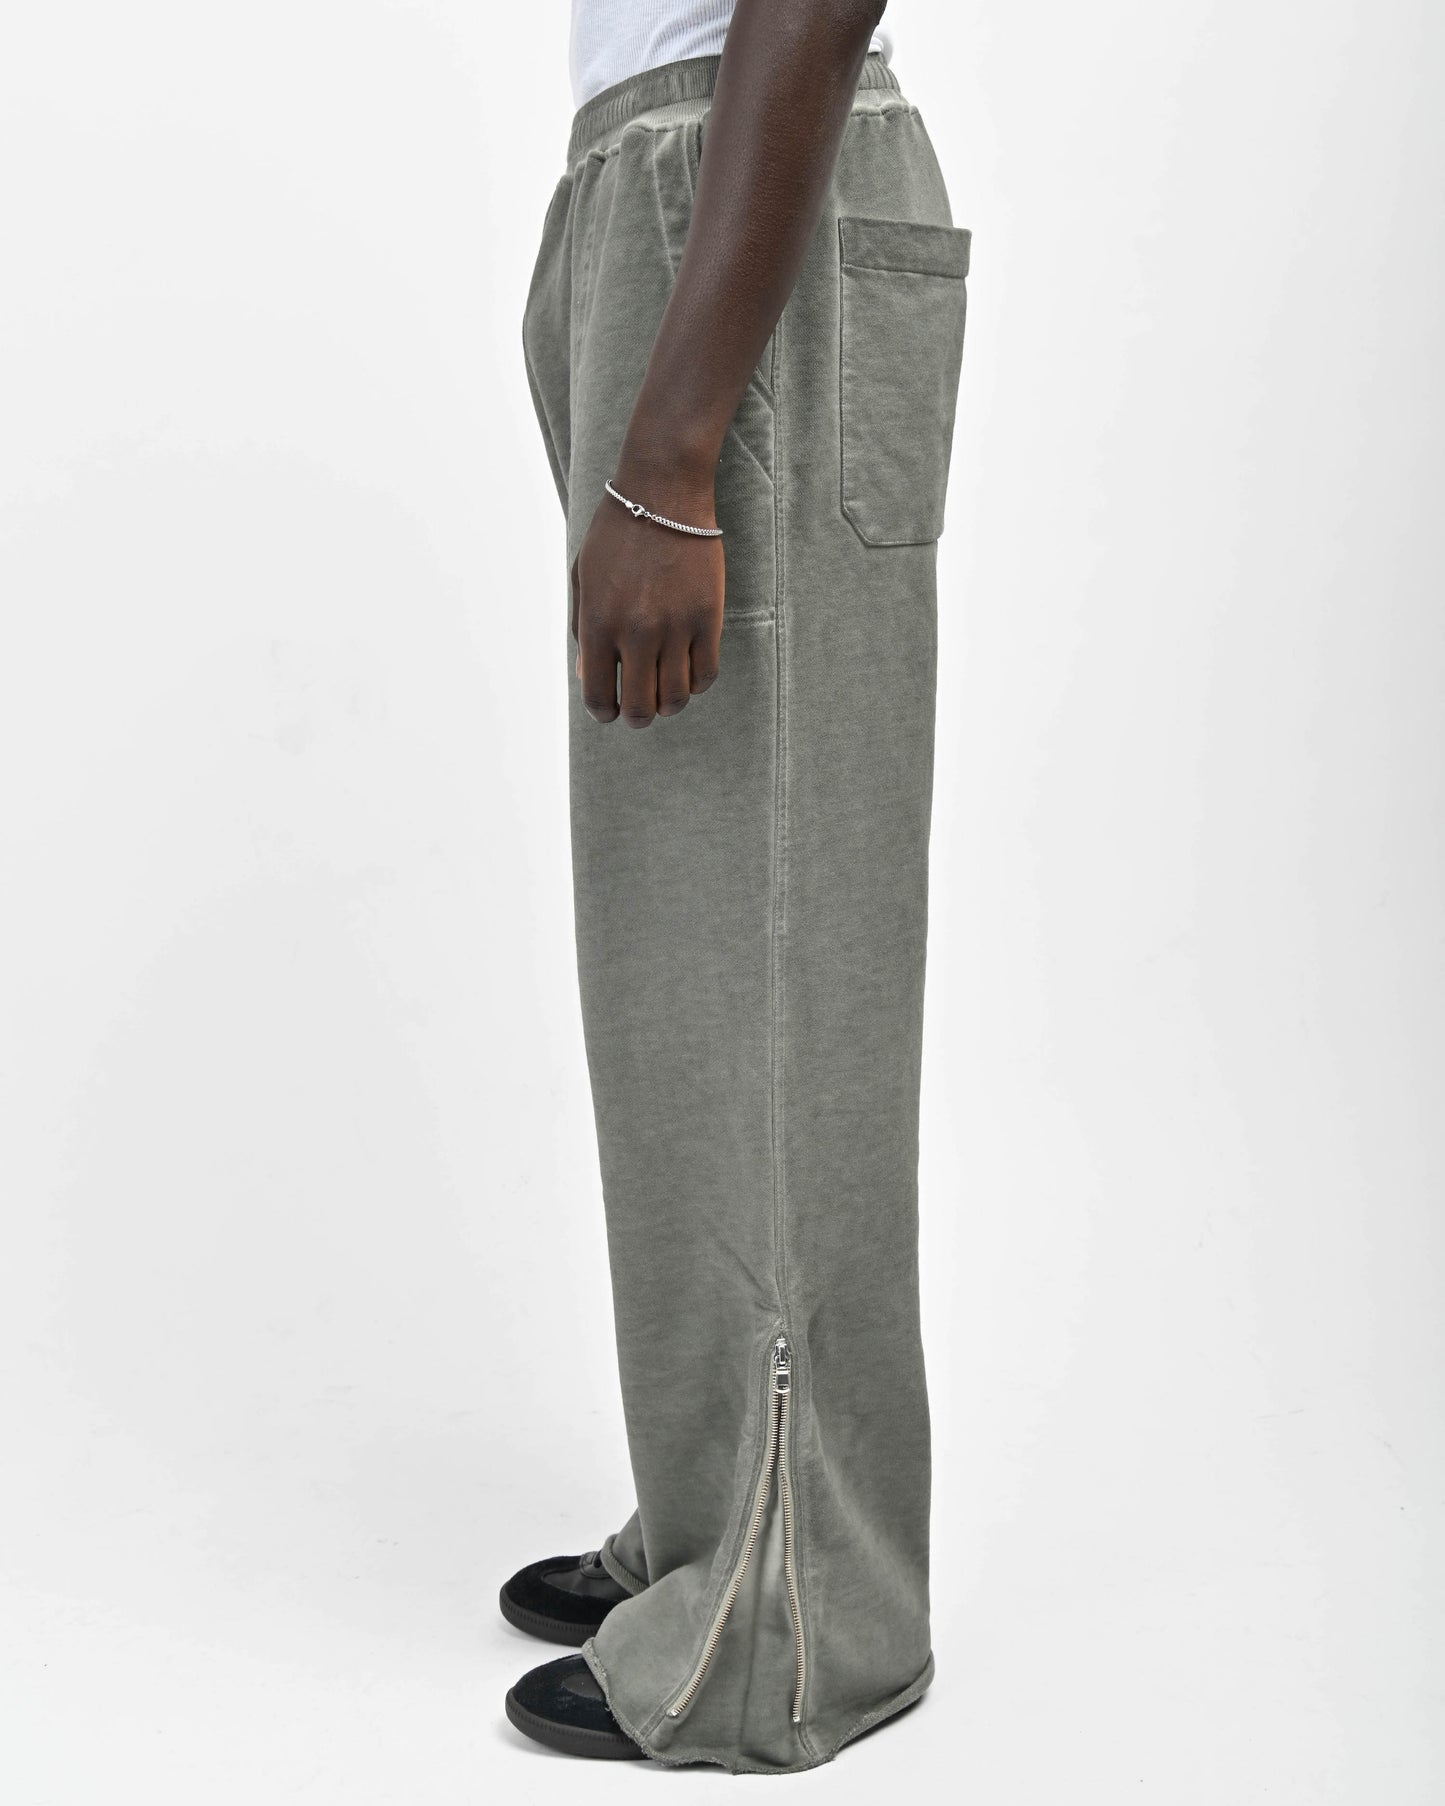 Side View of Zipper on Allora Track Pants by Aseye Studio